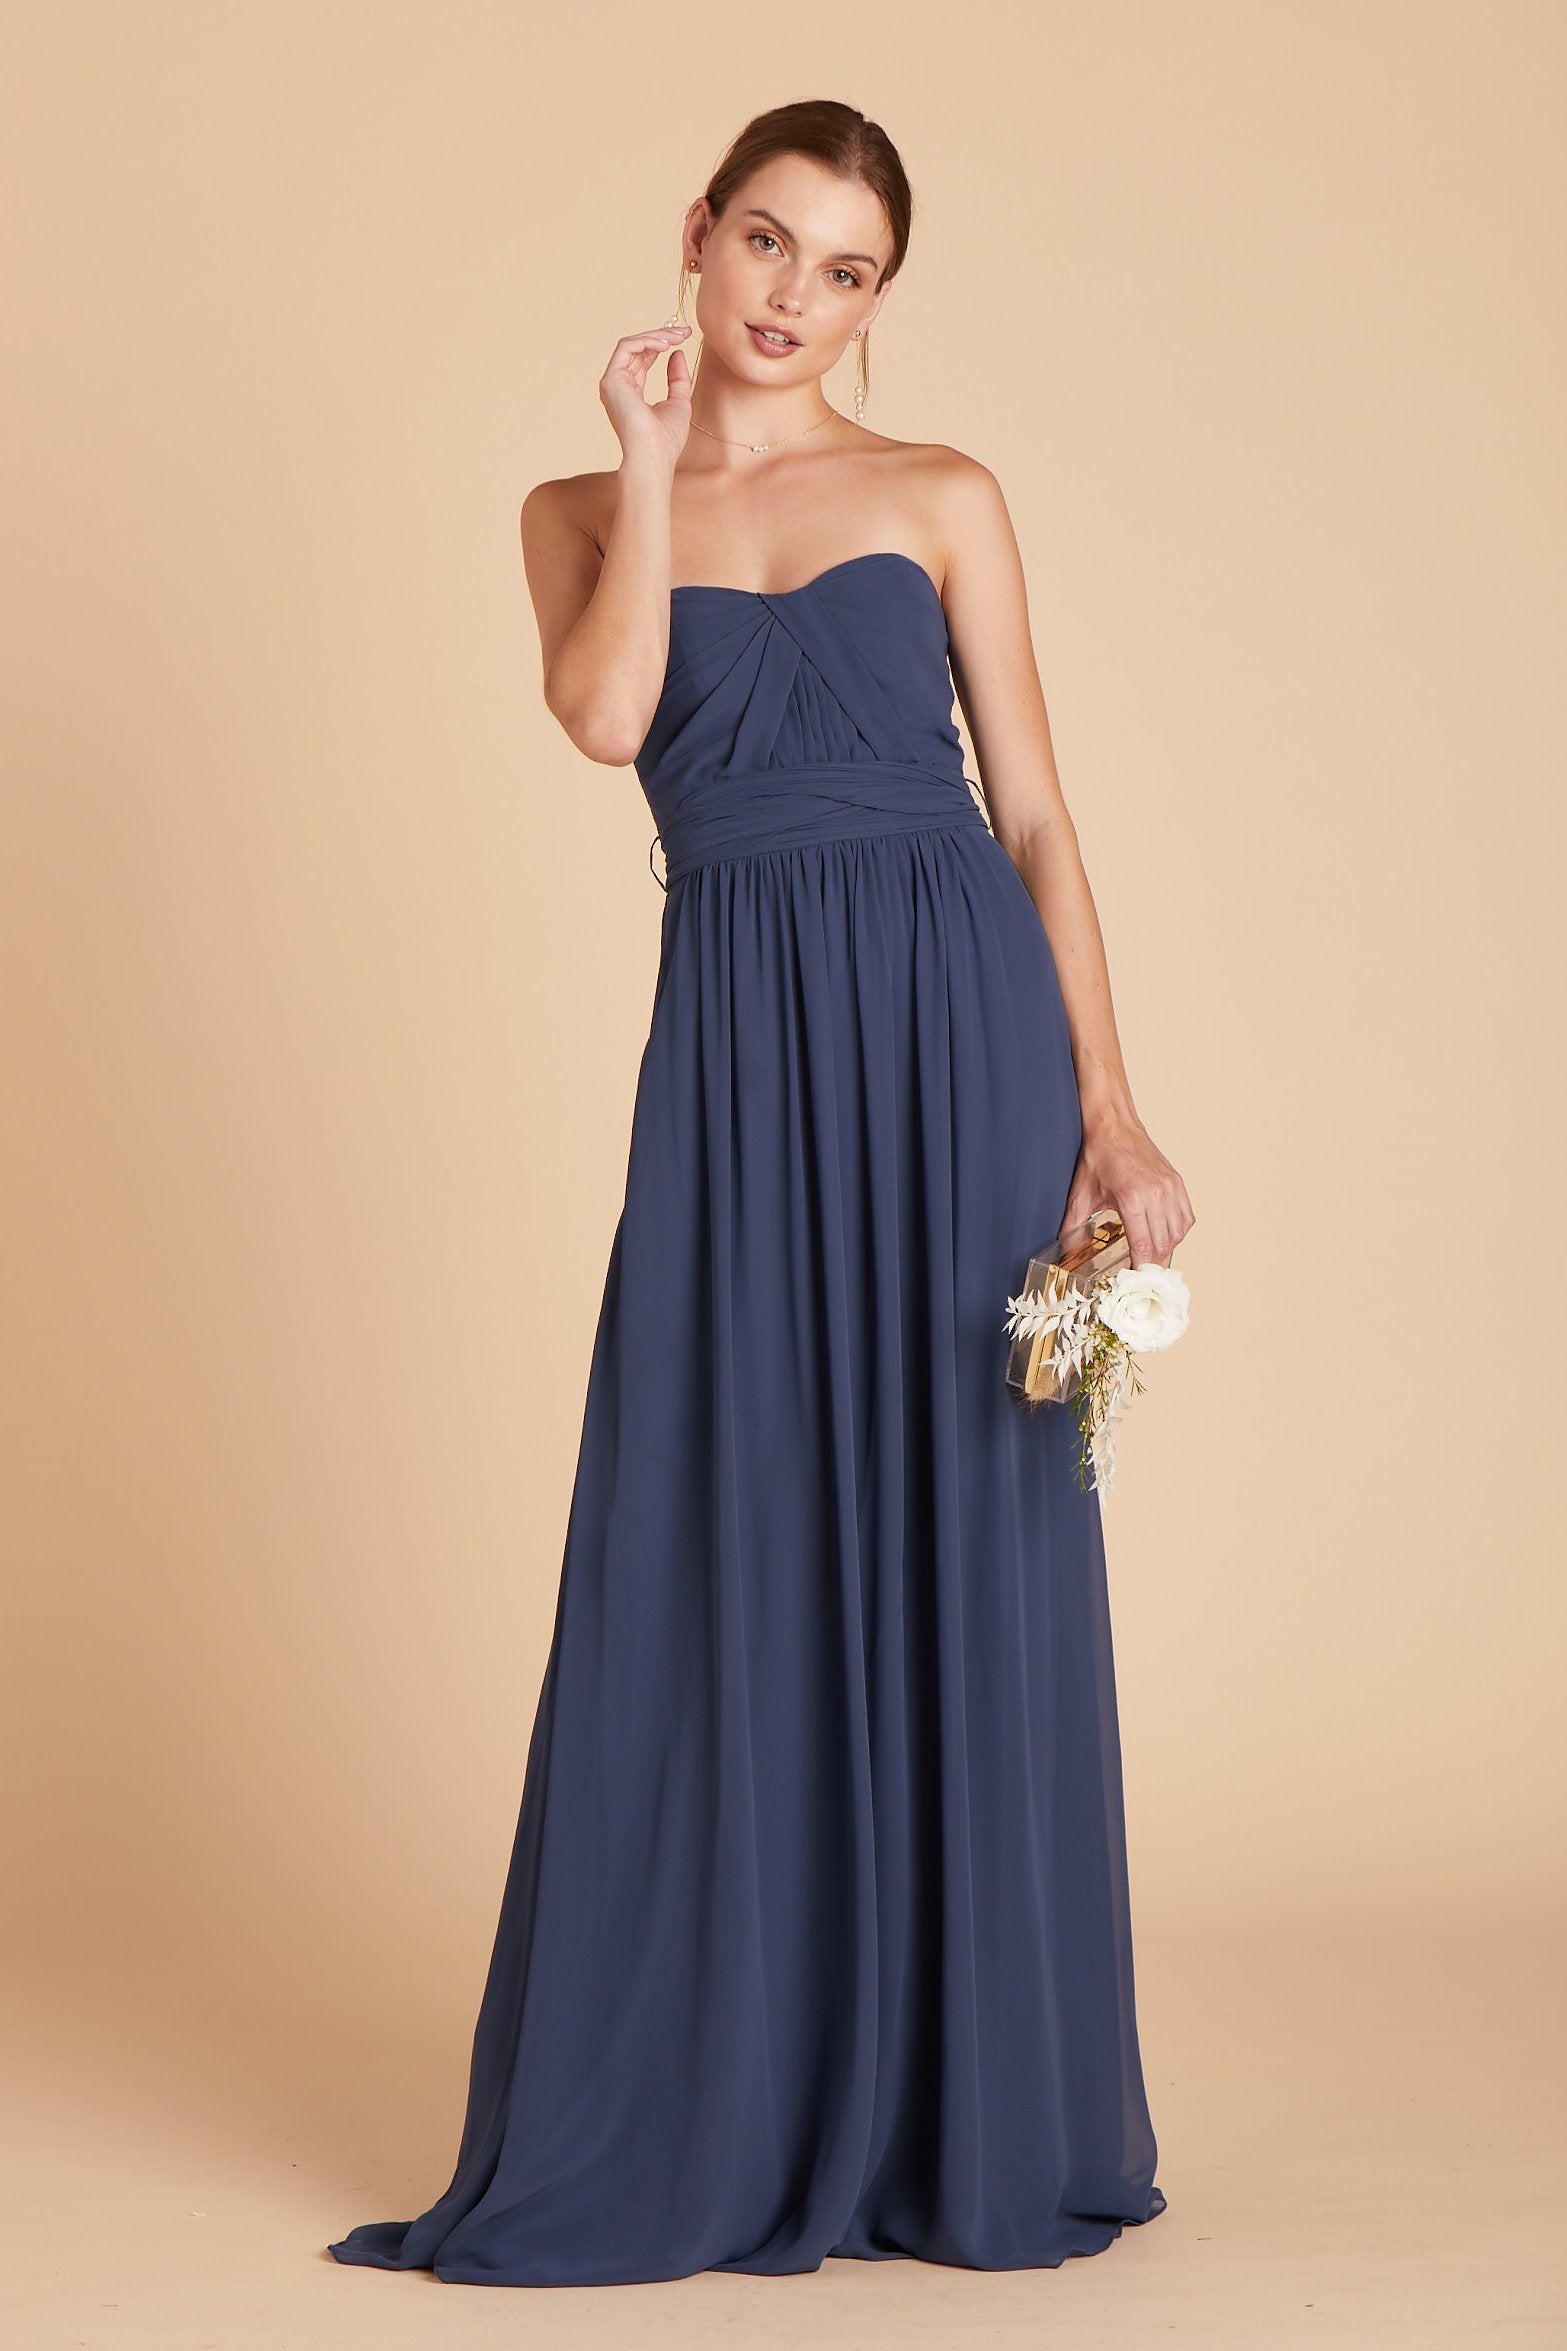 Grace convertible bridesmaid dress in slate blue chiffon by Birdy Grey, front view